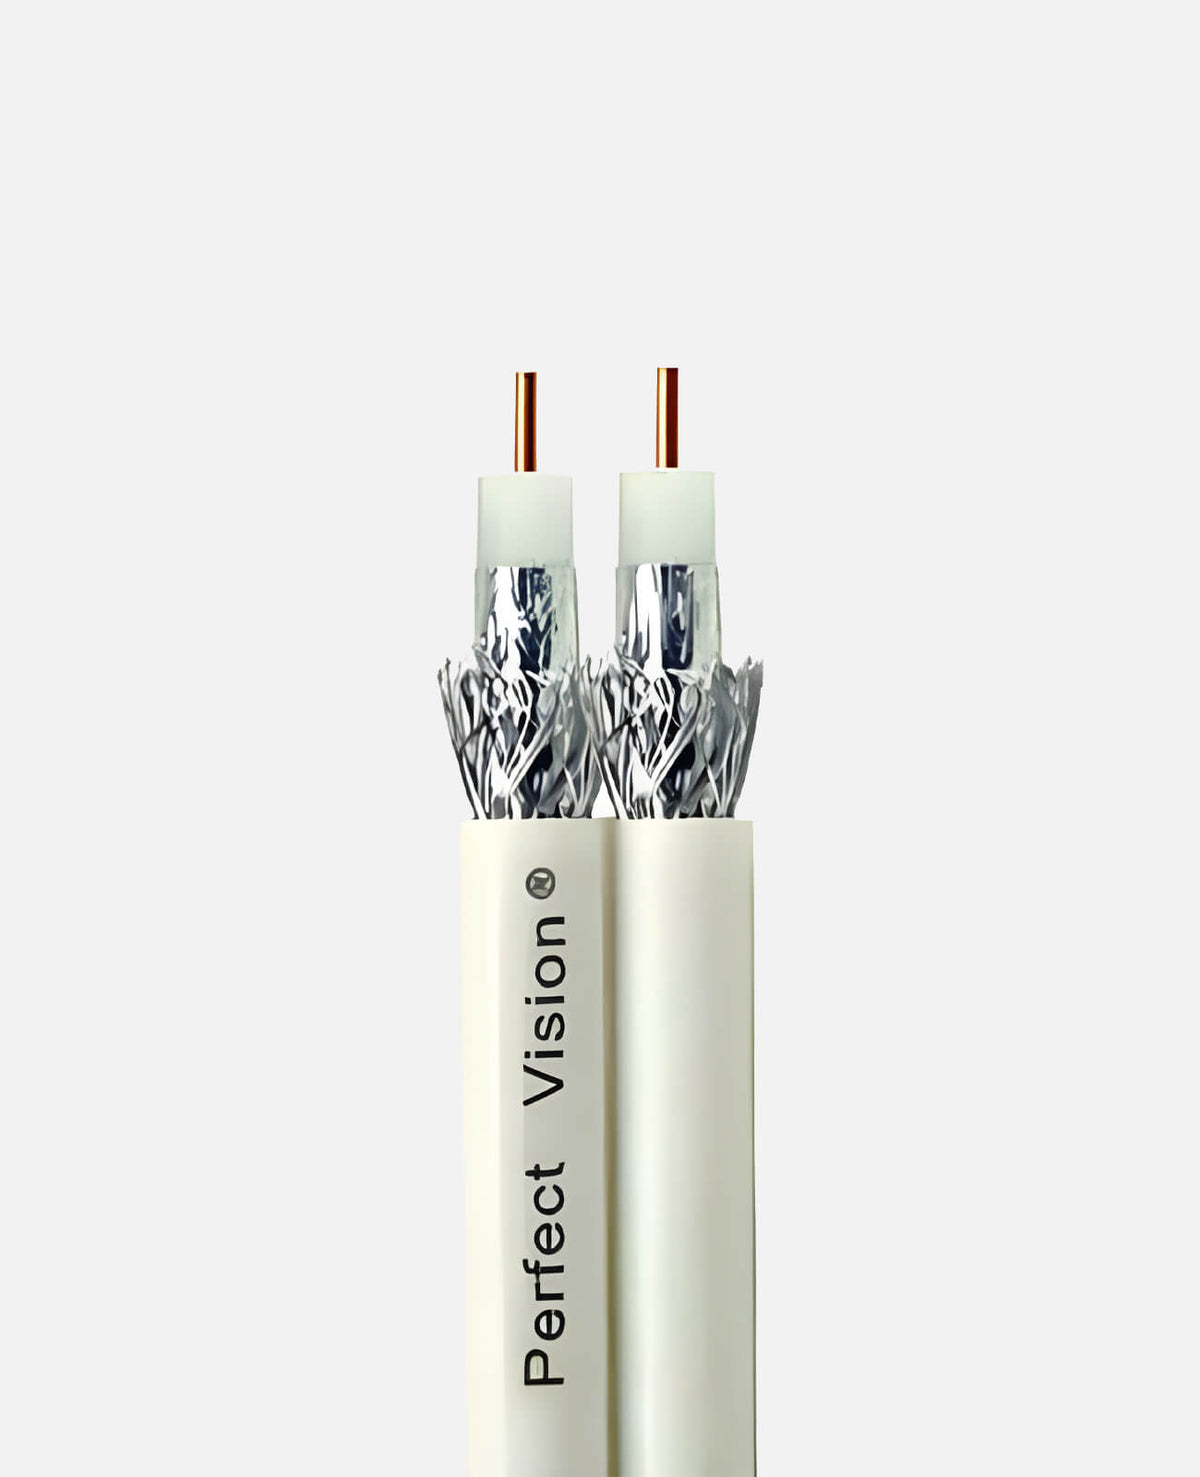 500’ White Dual RG6Coaxial Cable, Directv Approved (CB2W06DSCR0-05)